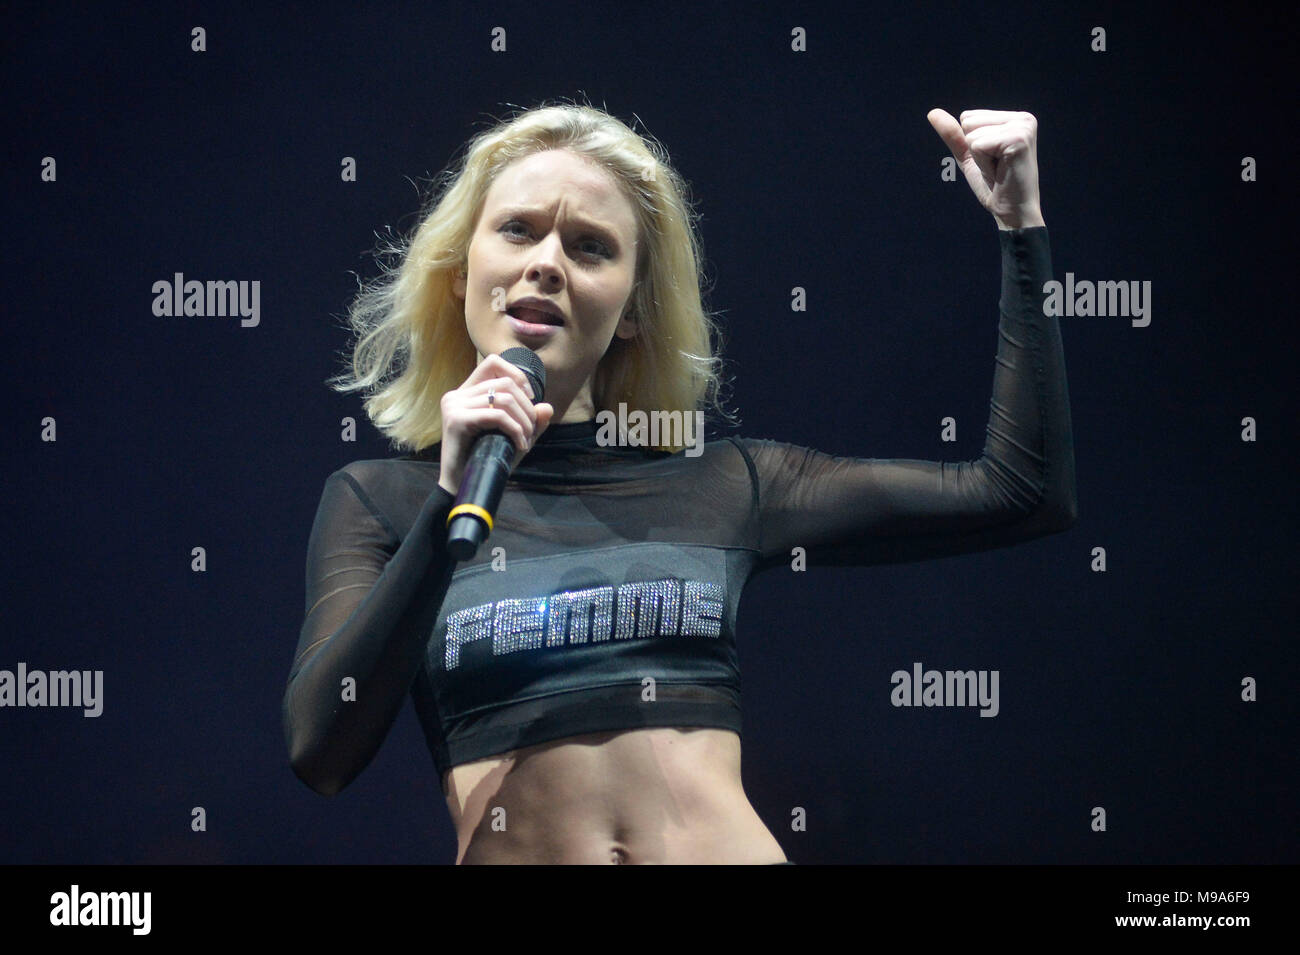 Sao Paulo, Brazil. 23rd March, 2018. Zara Larsson performs at the  Lollapalooza 2018 festival, held at the Autodromo de Interlagos in São Paulo,  on the afternoon of Friday, 23. (PHOTO: LEVI BIANCO/BRAZIL